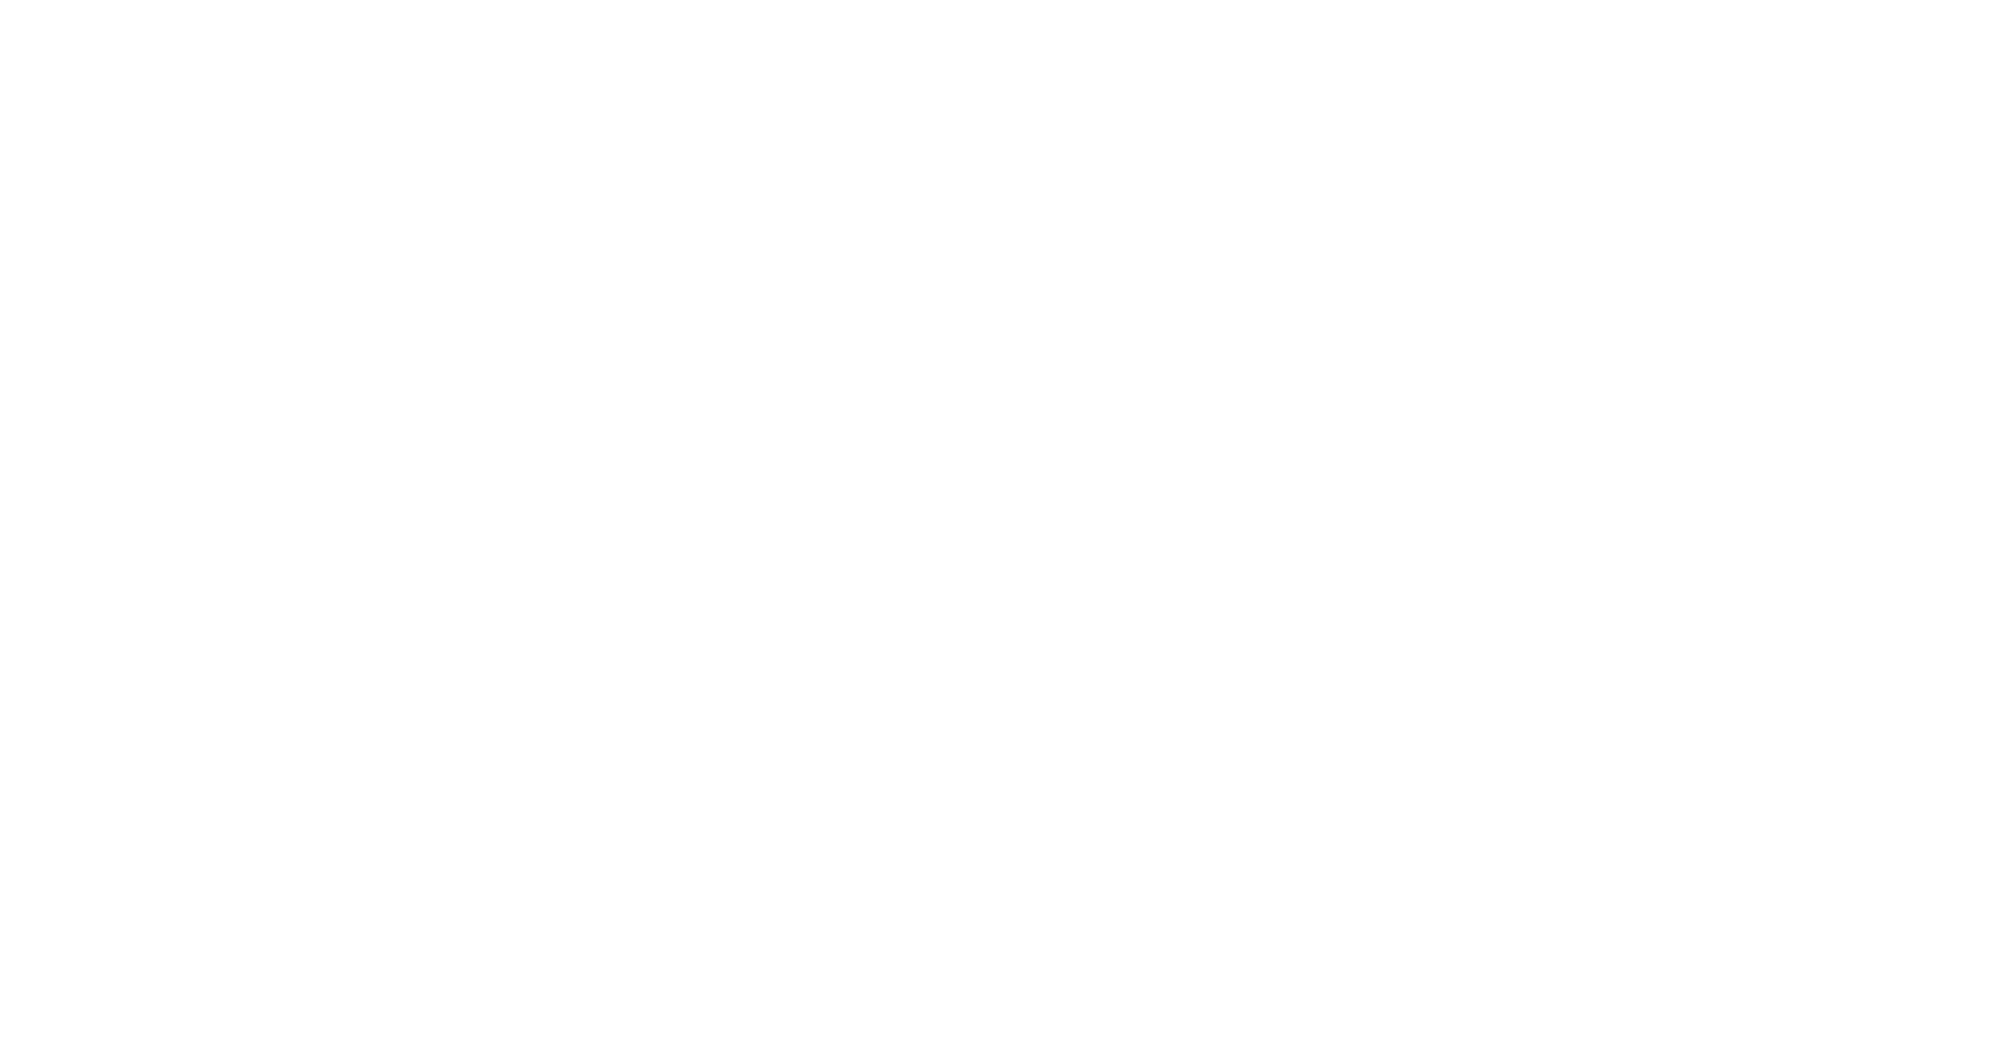 Connor Denoon Counselling